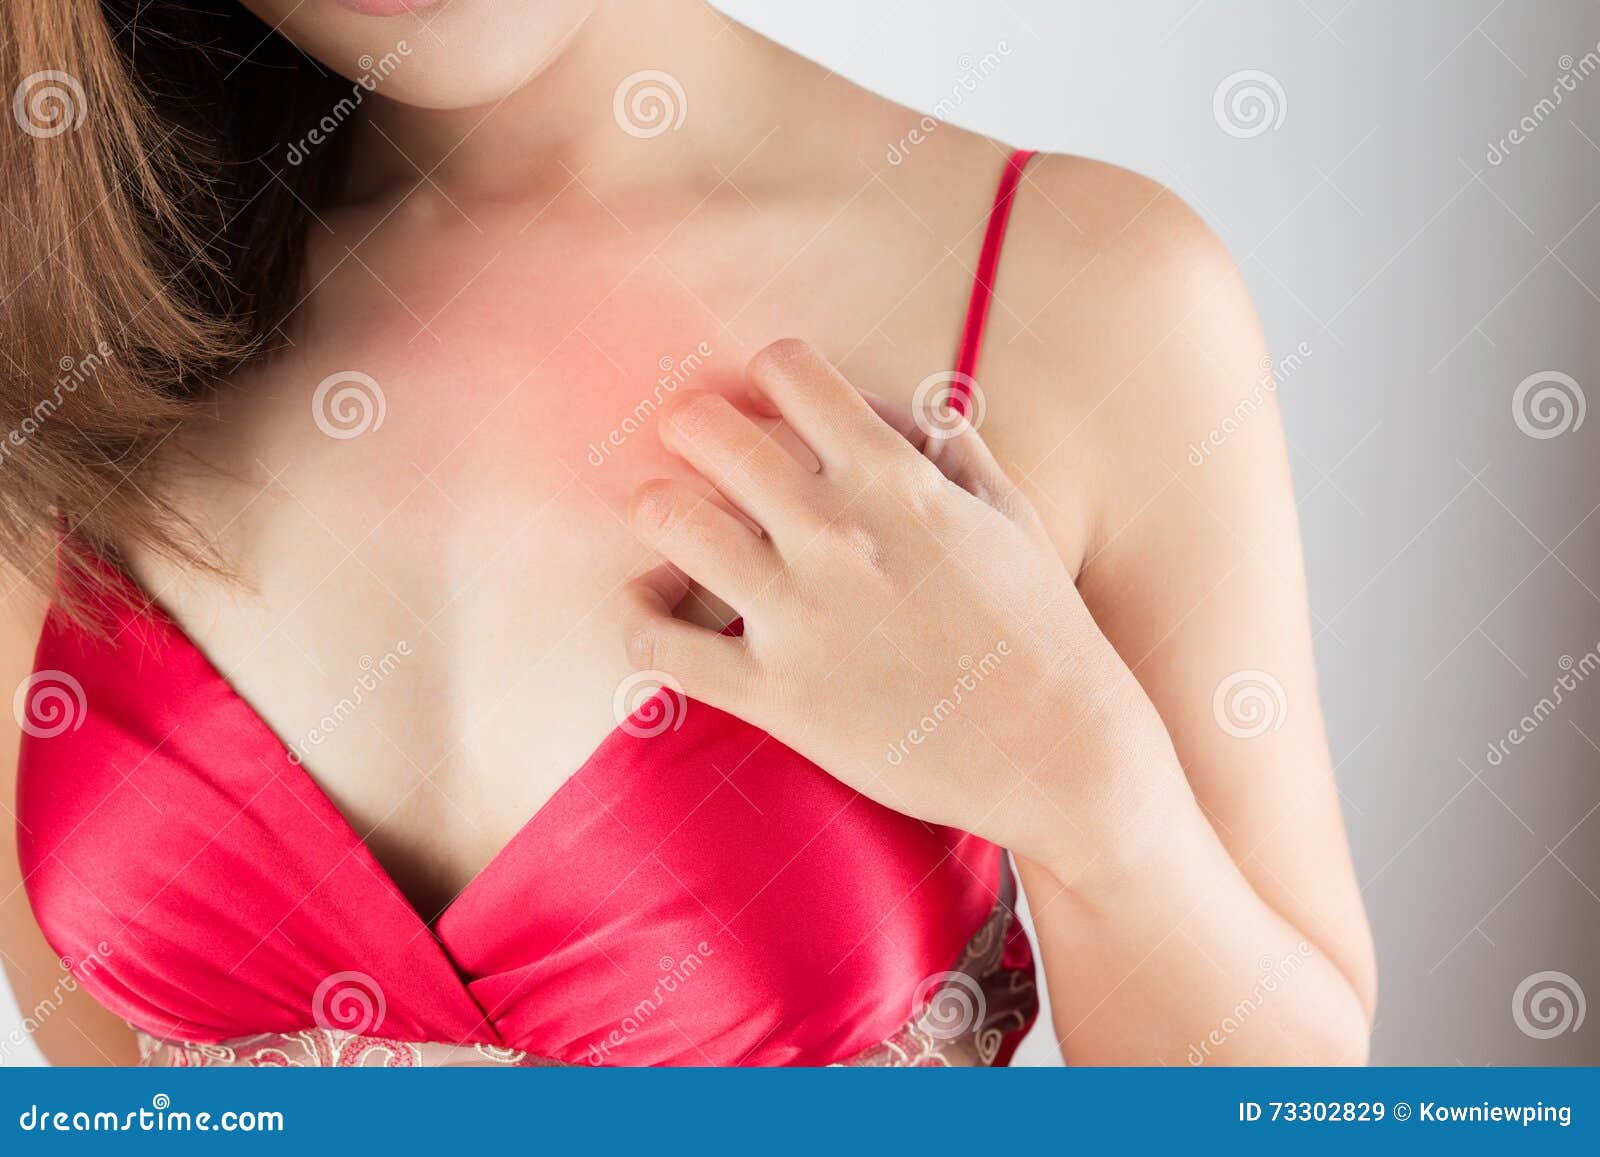 Woman Scratching Her Itchy Chest Stock Image - Image of inflammation,  burns: 73302829